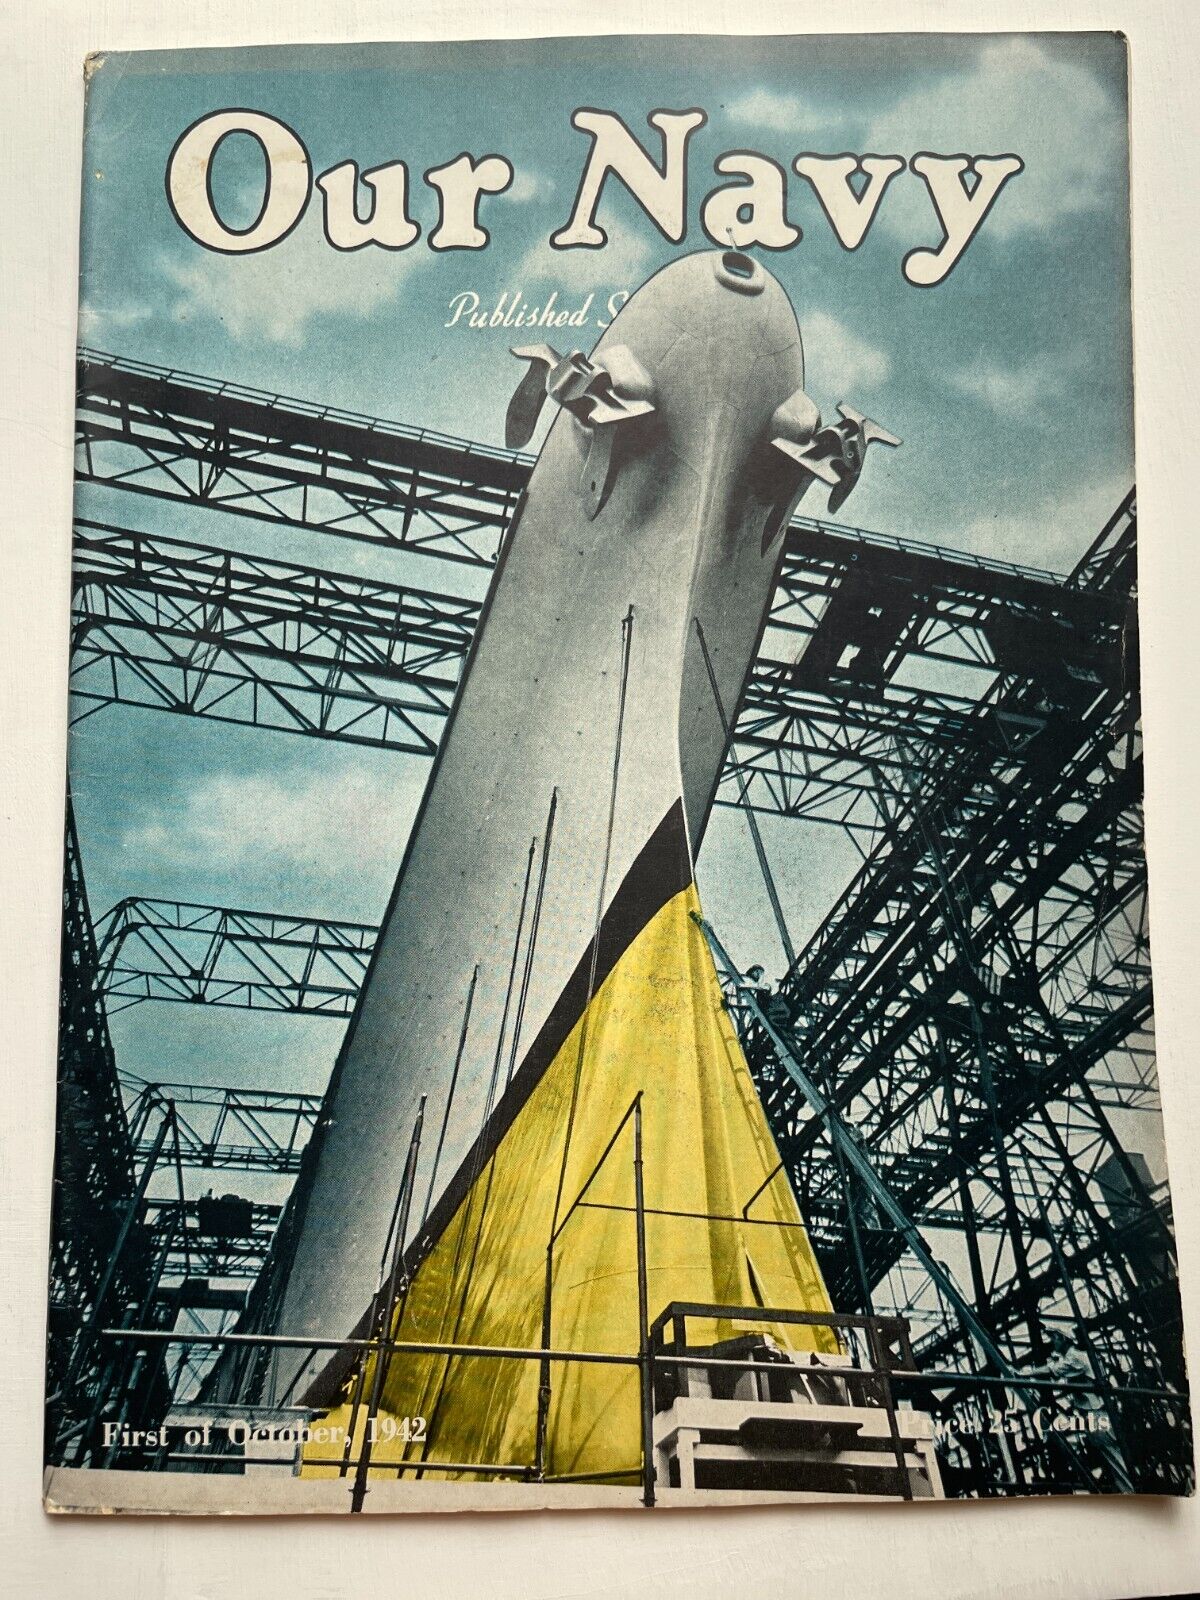 October 1, 1942 Our Navy Magazine w/ WWII Stories & Pictures- USS Iowa on Cover